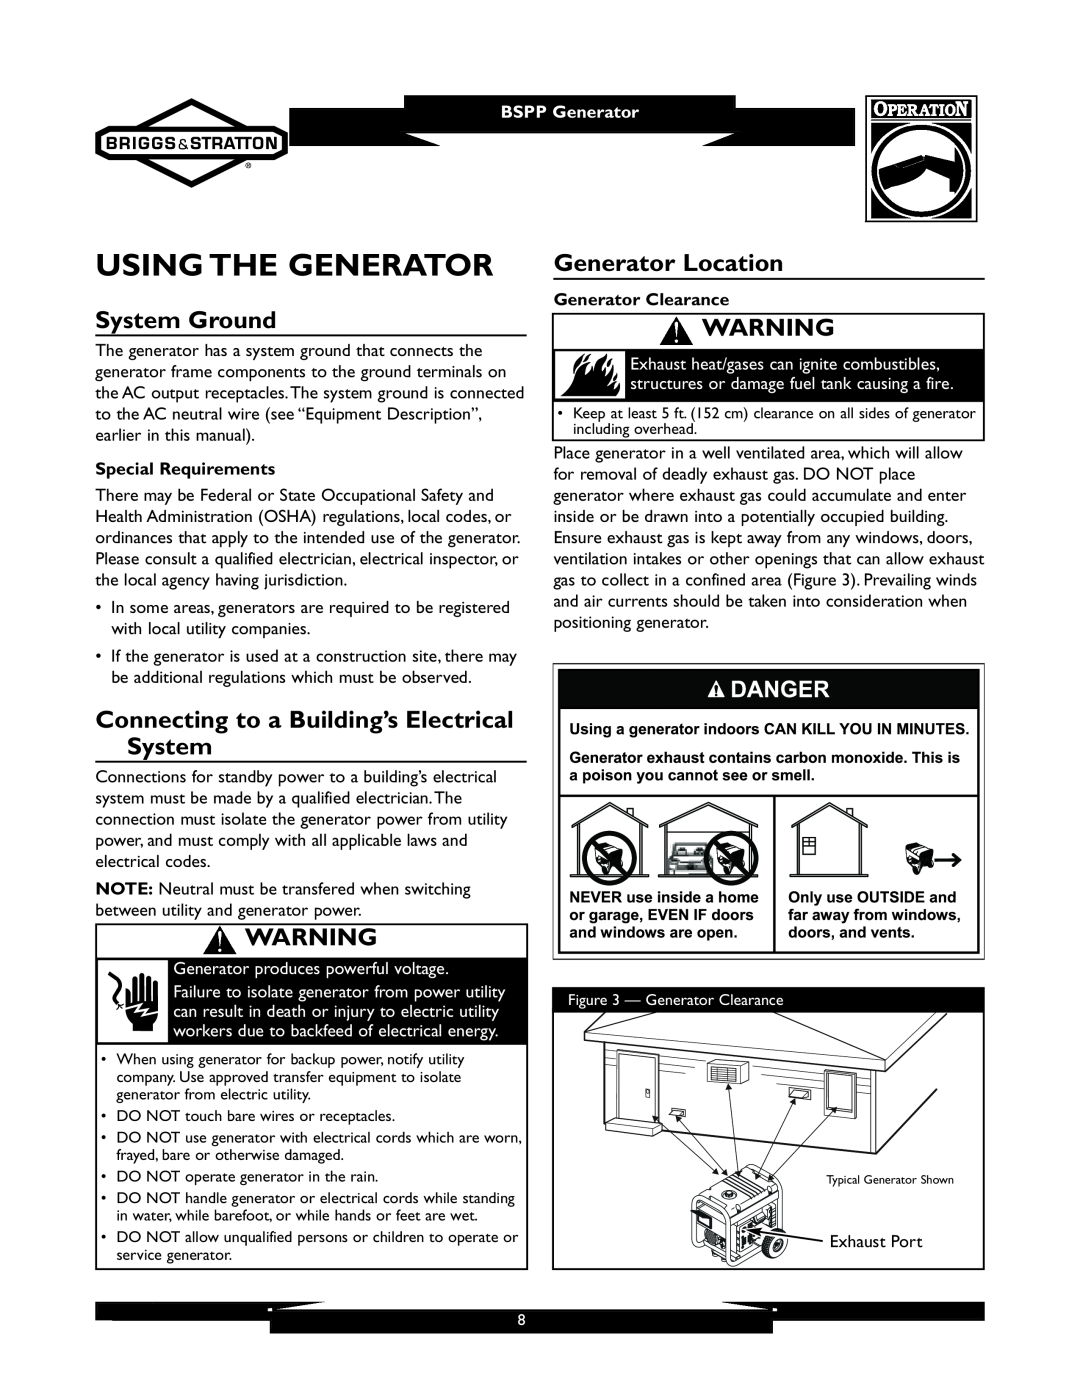 Briggs & Stratton 01933-1 Using The Generator, System Ground, Connecting to a Building’s Electrical System, BSPP Generator 